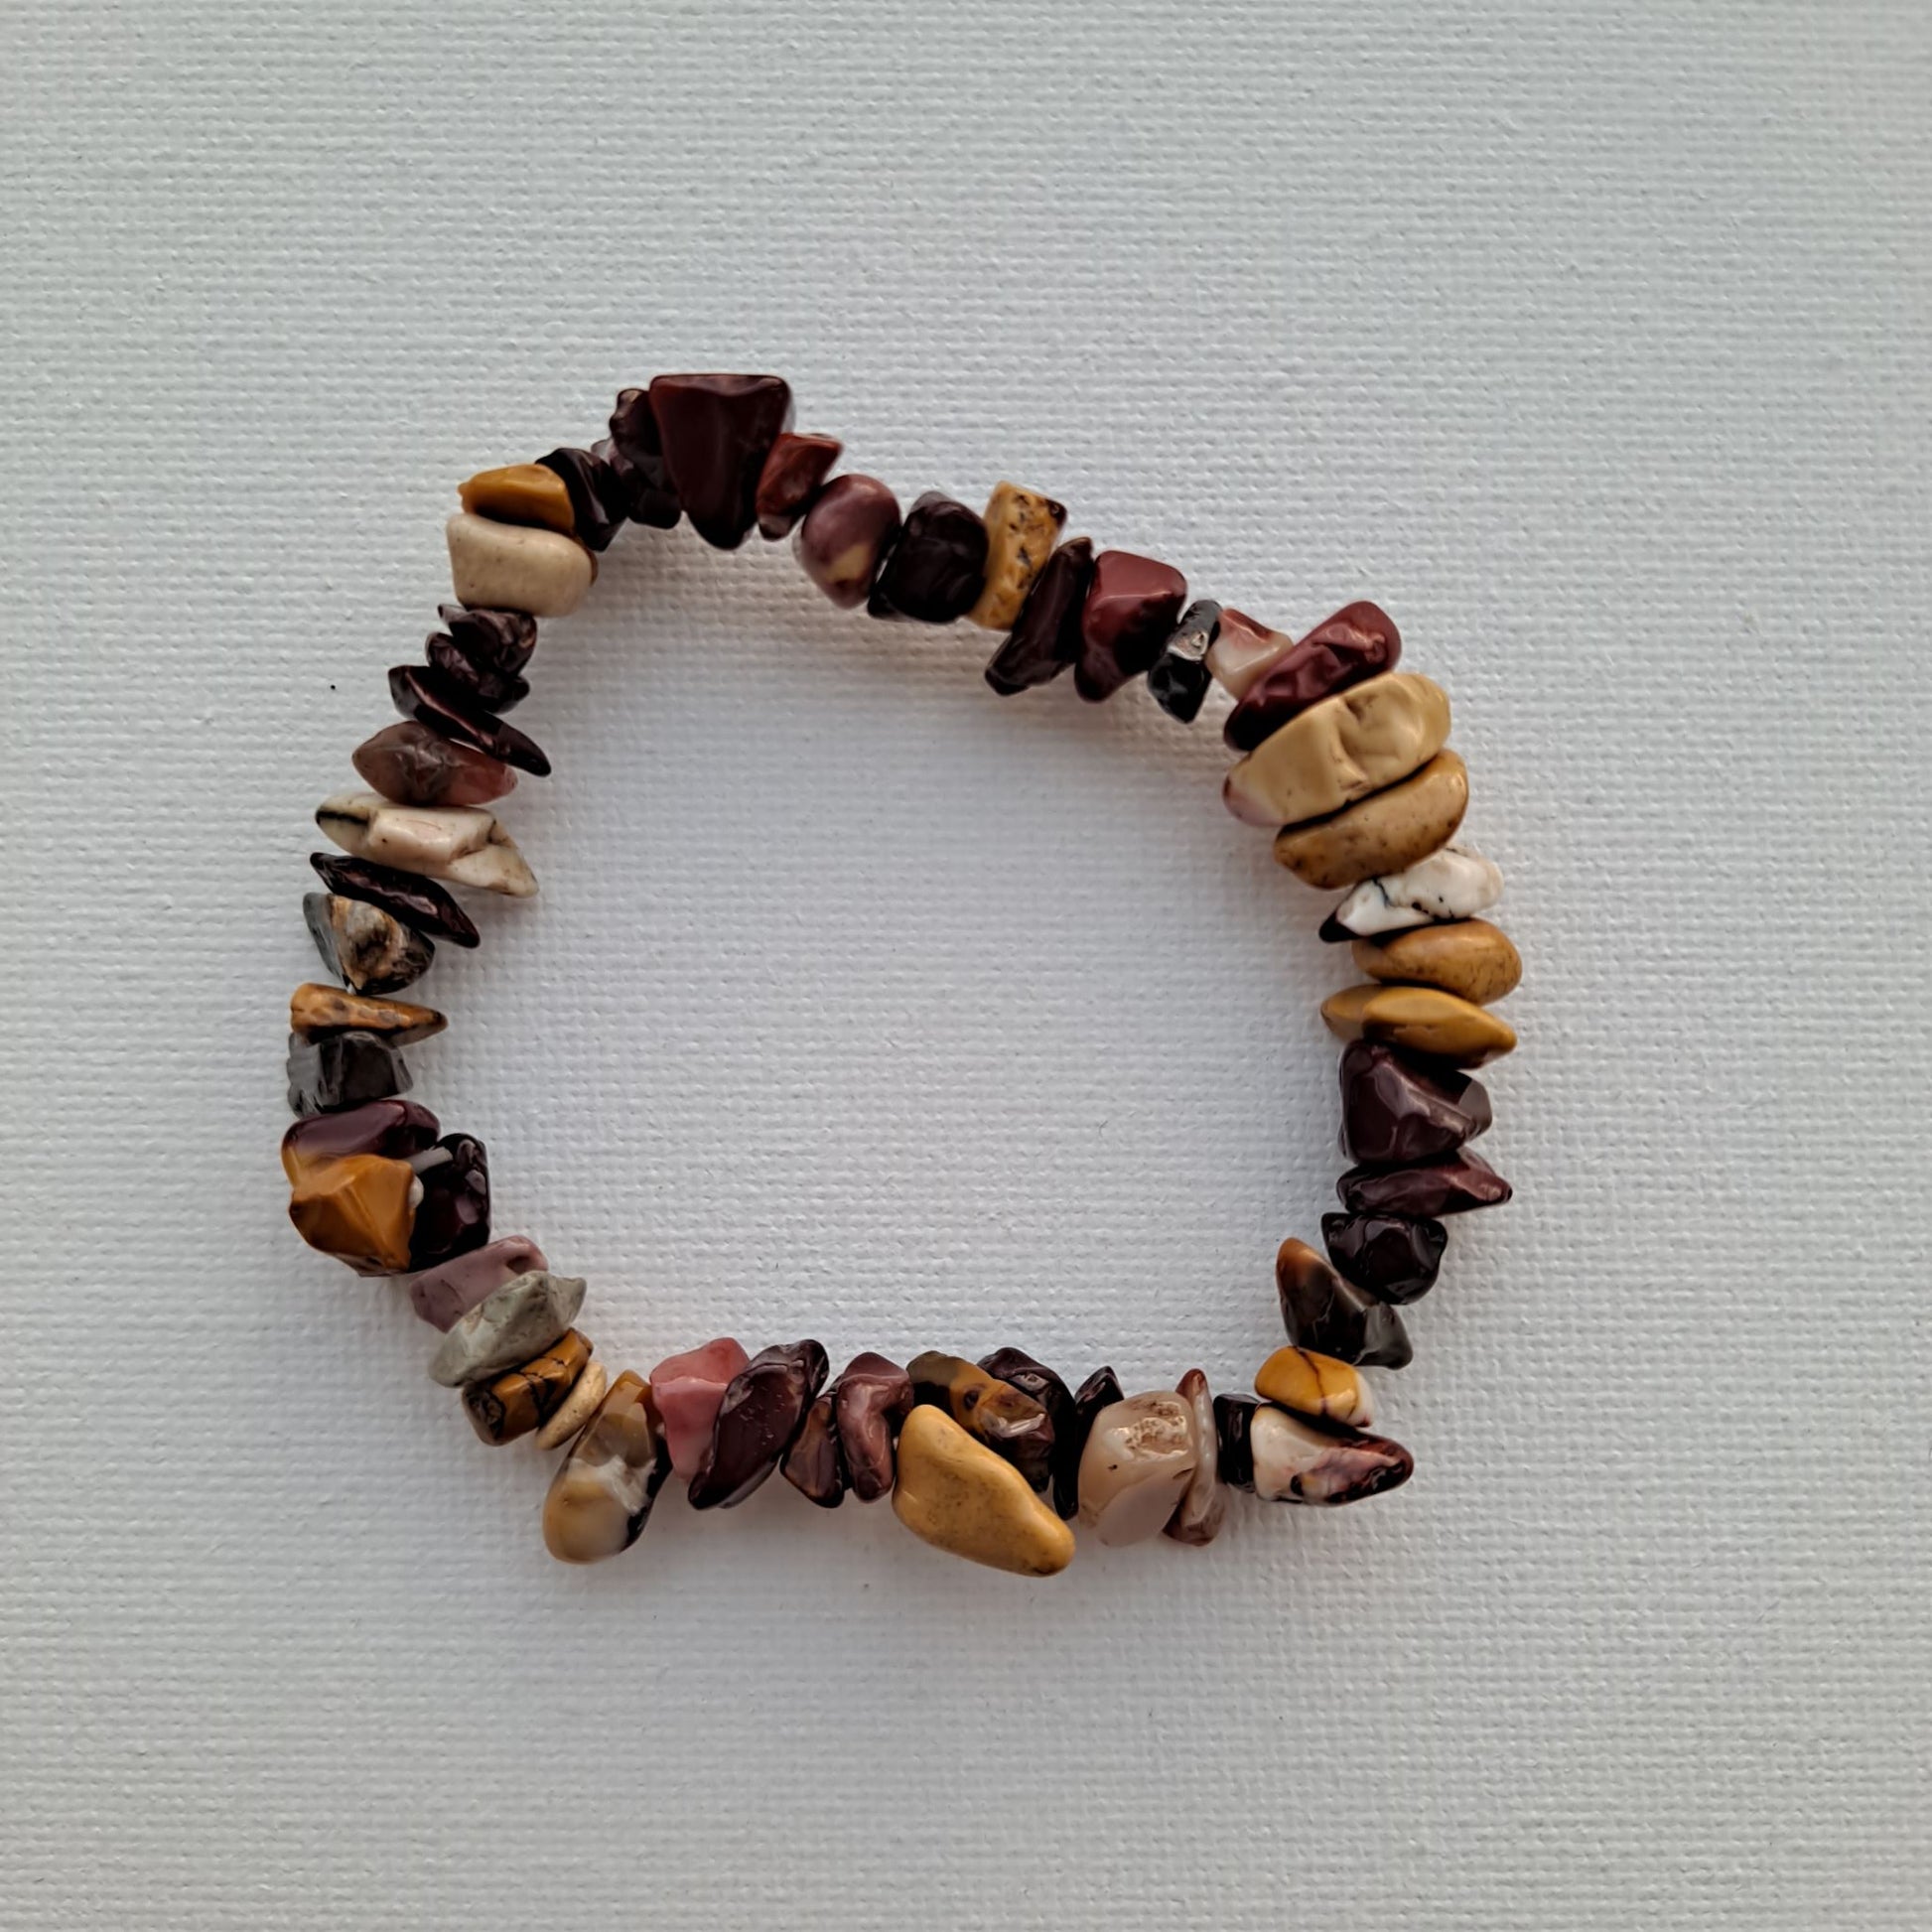 7-Inch Mookaite Bracelet | Dumi's Crystals | Vibrant Mookaite chips strung on a durable stretch cord. This bracelet is believed to promote vitality, emotional balance, and a connection to the earth's energy.